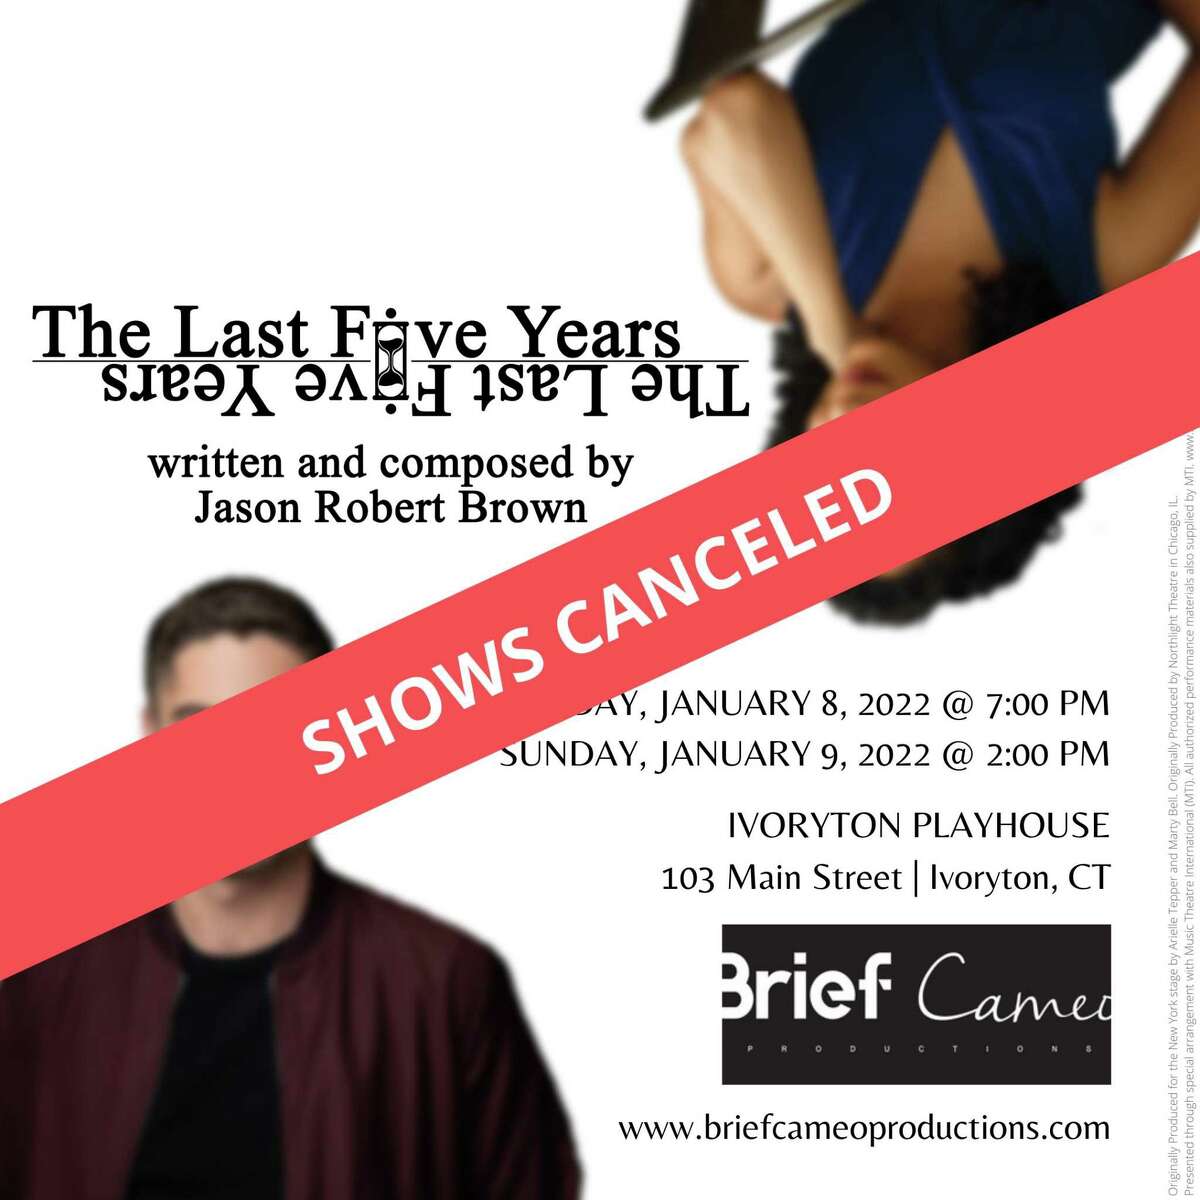 Brief Cameo Productions canceled its production of “The Last Five Years” at the Ivoryton Playhouse in Essex due to the state’s high COVID-19 infection rate.